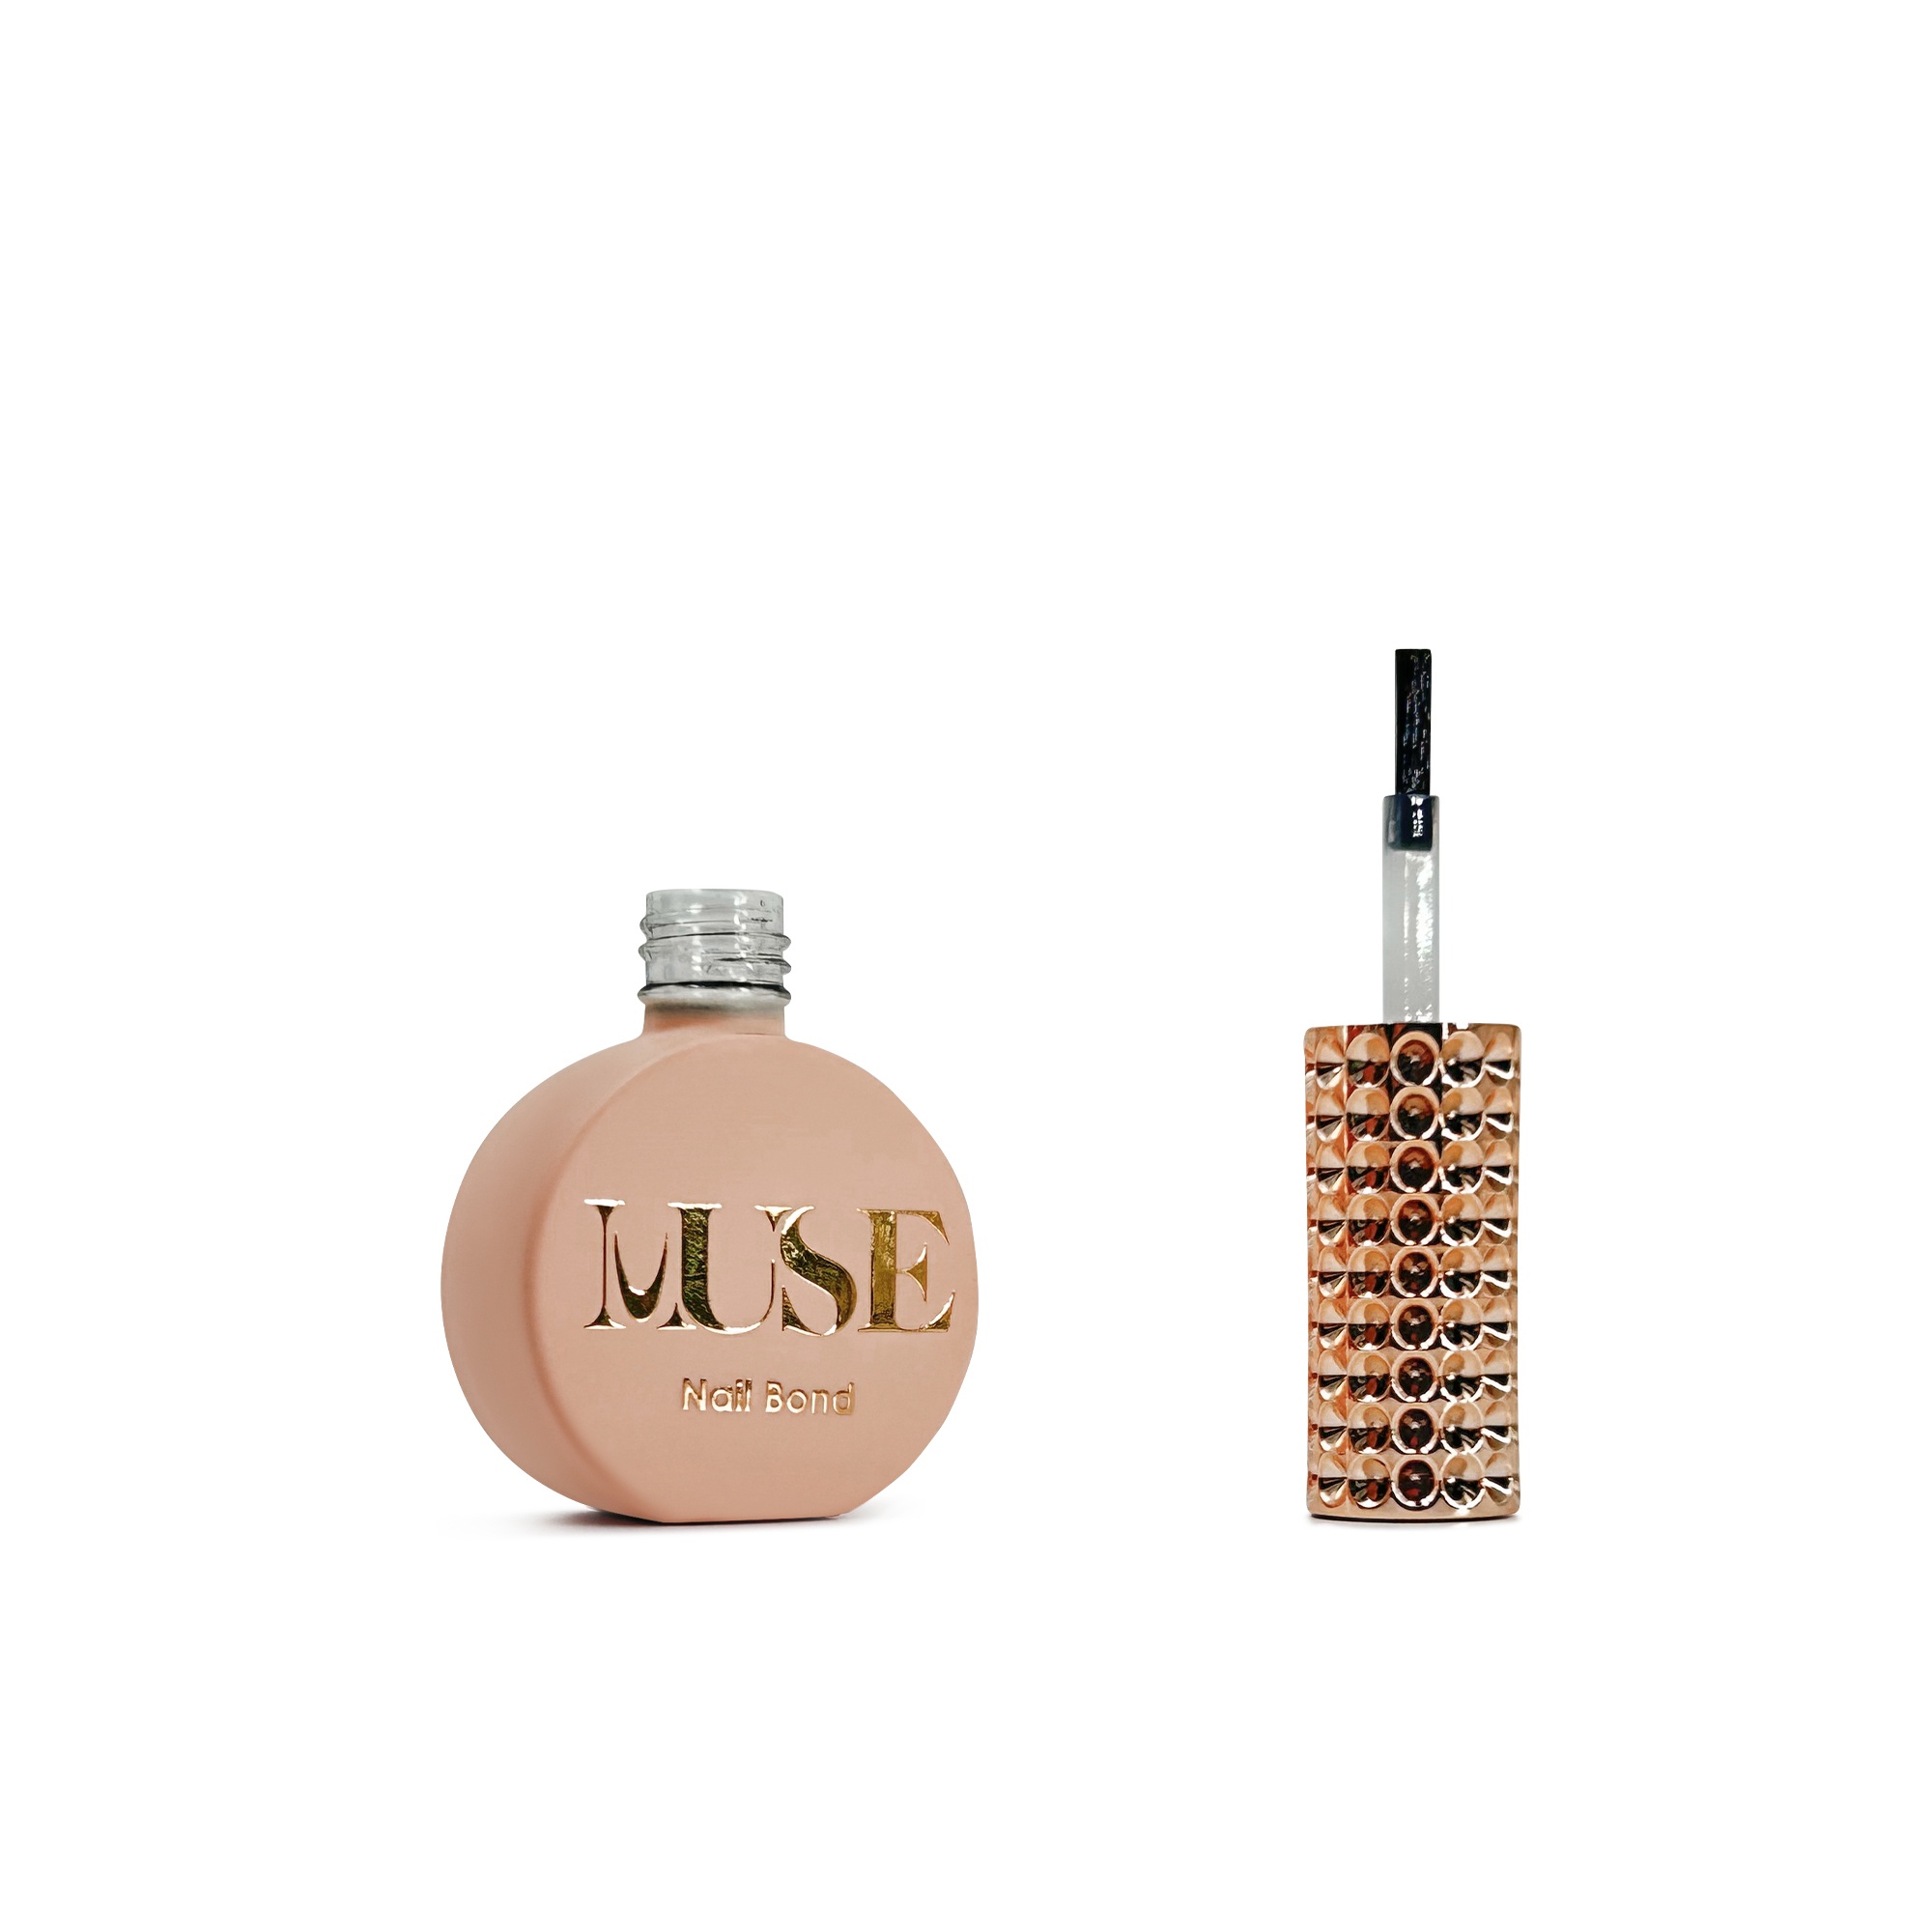 Muse Bond 12ml/100ml.A bottle of "MUSE" nail bond, with a matte pink finish and gold lettering on the bottle, next to its applicator brush with a clear handle adorned with shiny copper-colored rhinestones.